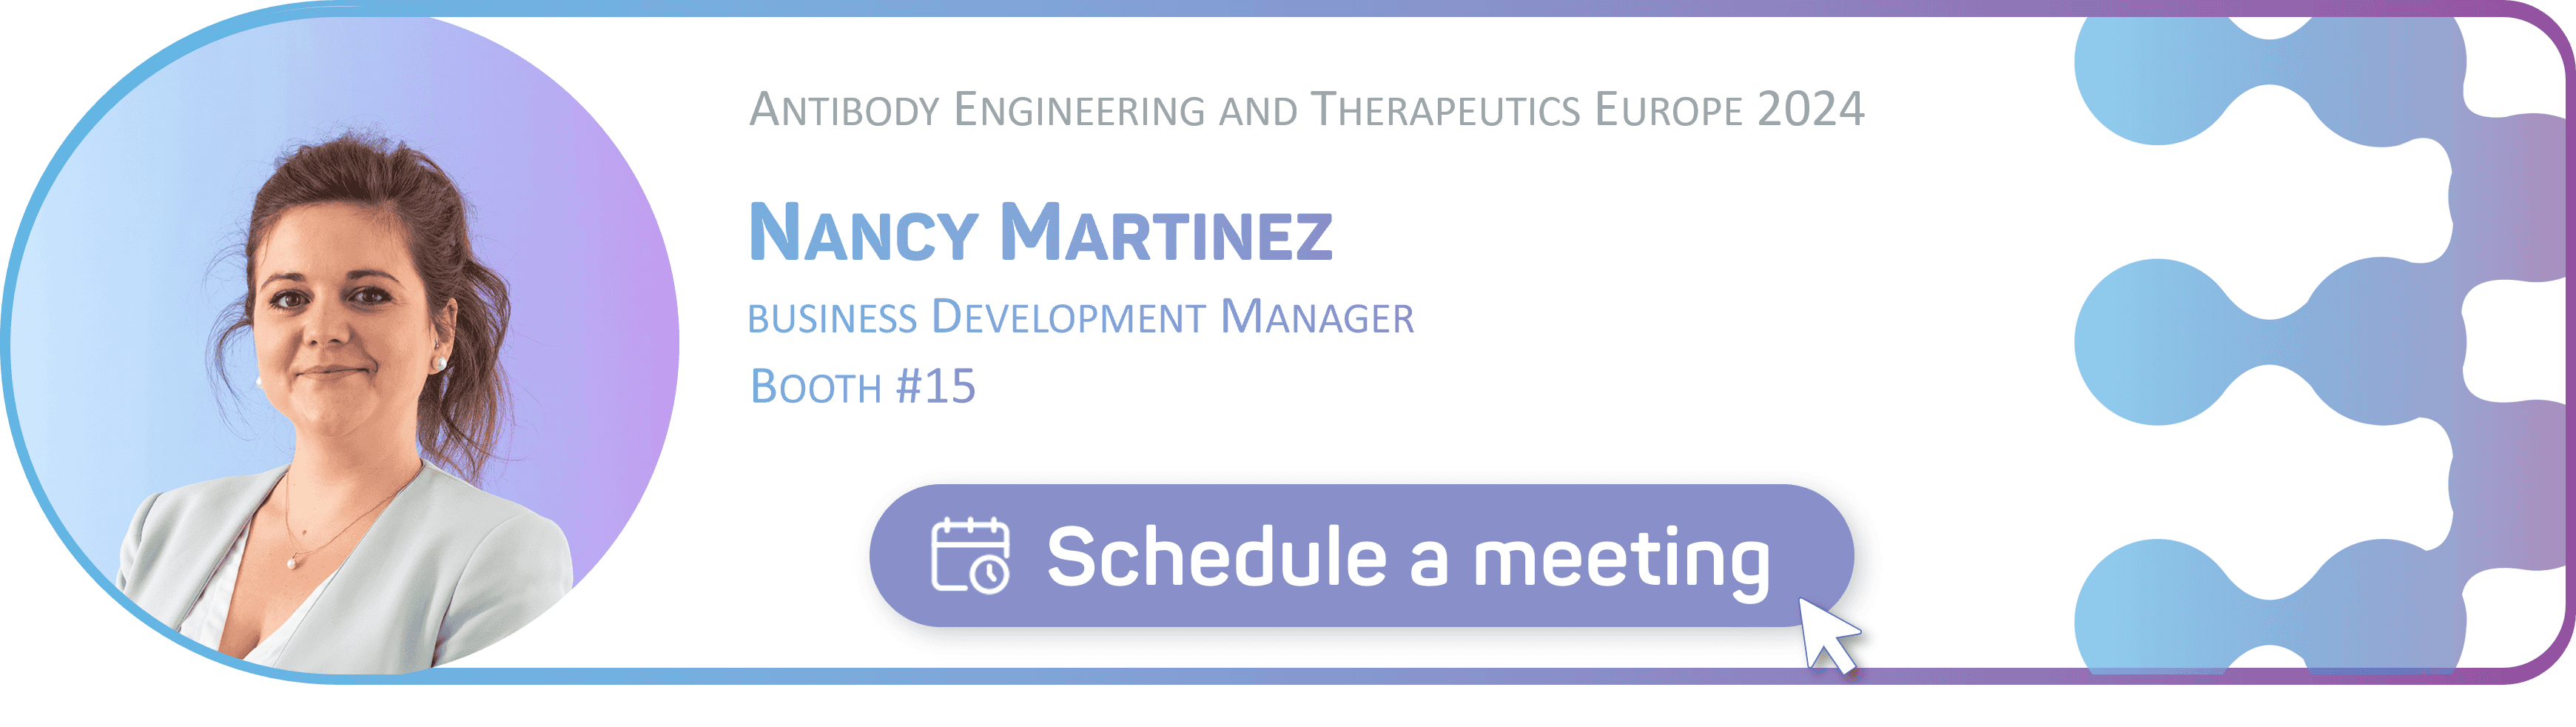 Schedule a meeting with Nancy Martinez at AET 2024